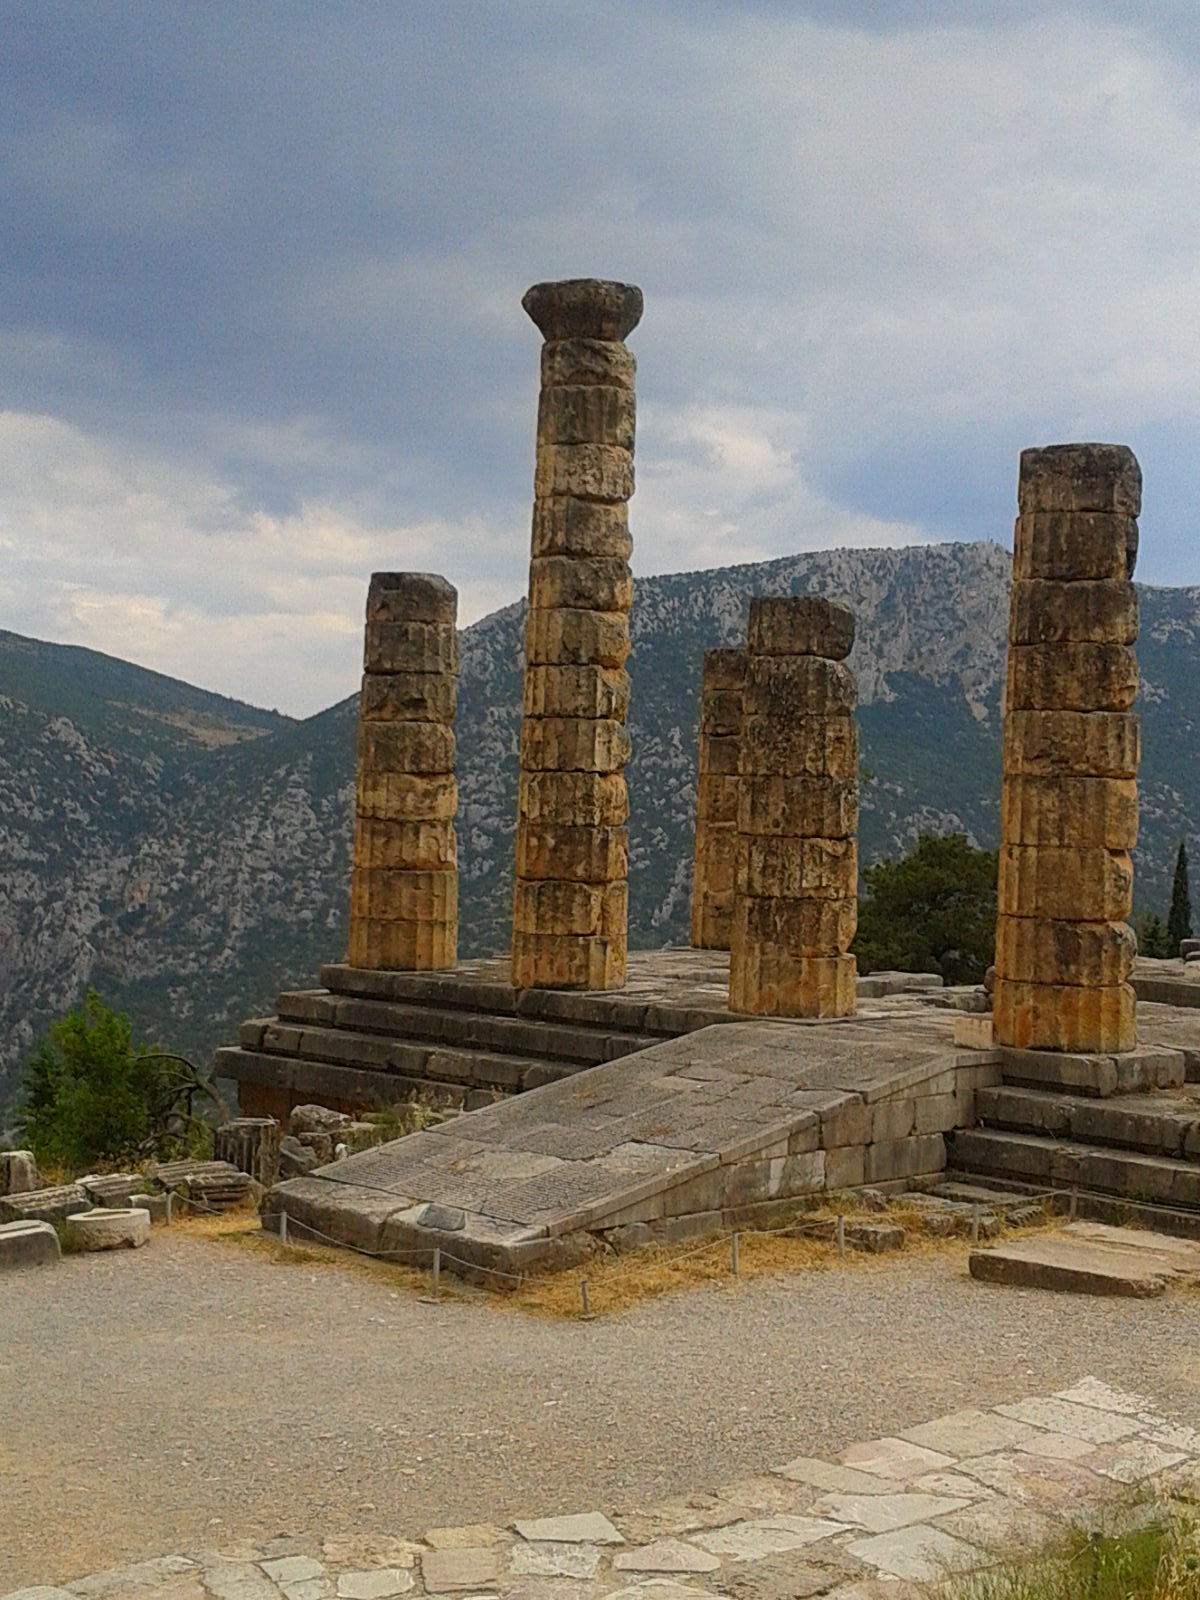 The Temple of Apollo in Delphi - Click Image Below to Follow Link to the Delphi Museum Website